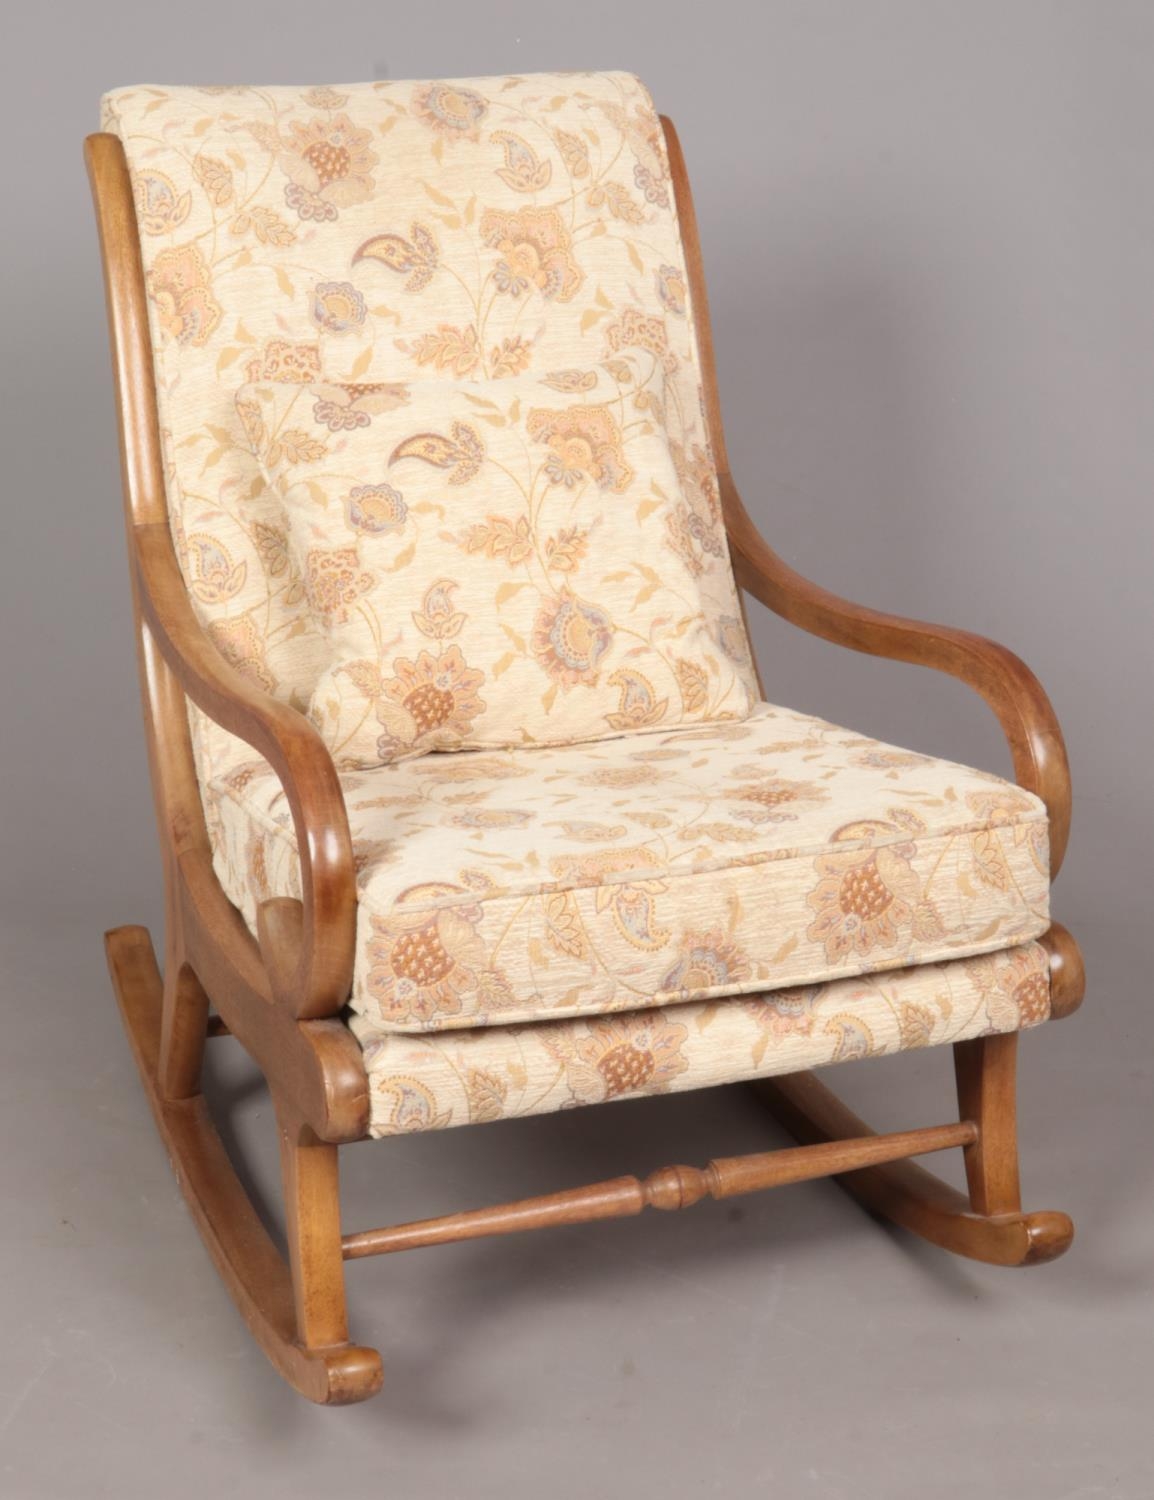 An Ercol style curved rocking chair, with scrolled arms in a light finish. Seat has light brown